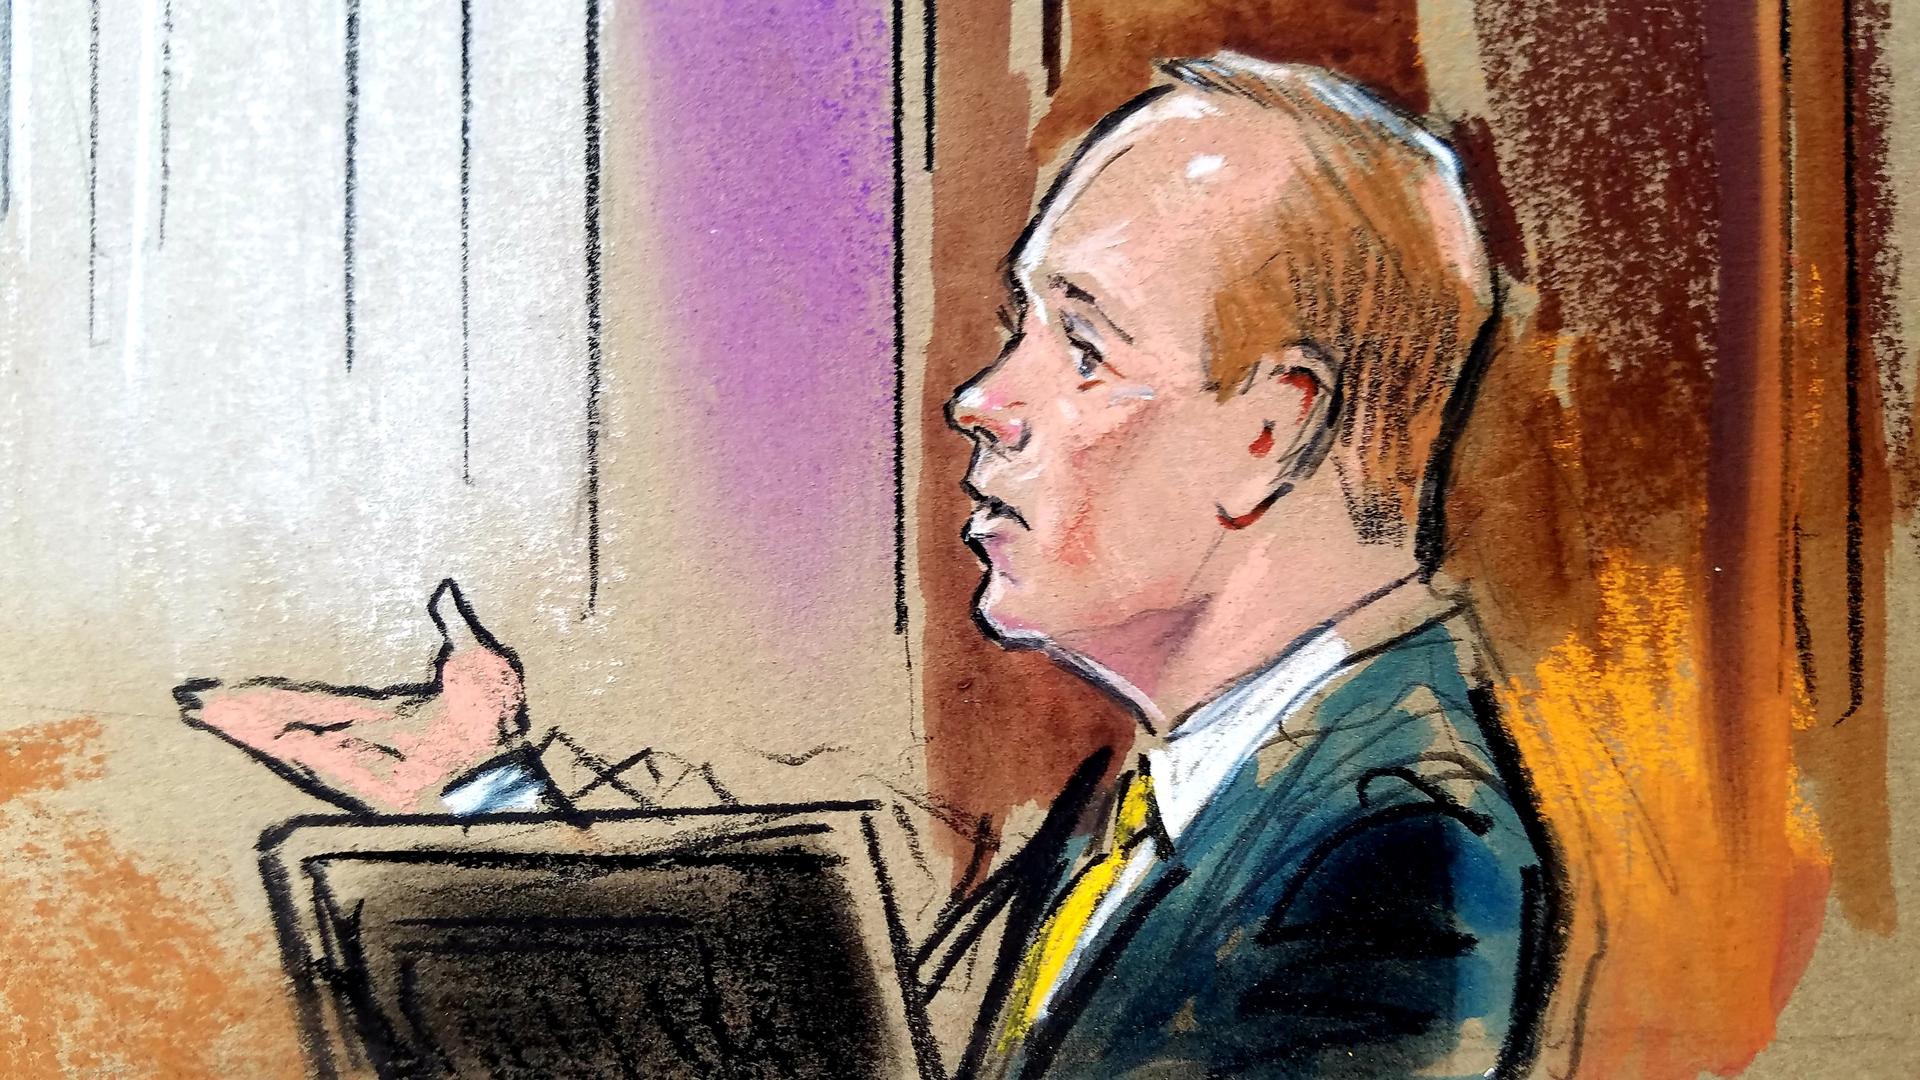 In this illustration, Rick Gates is shown testifying wearing a suit while sitting on the stand.